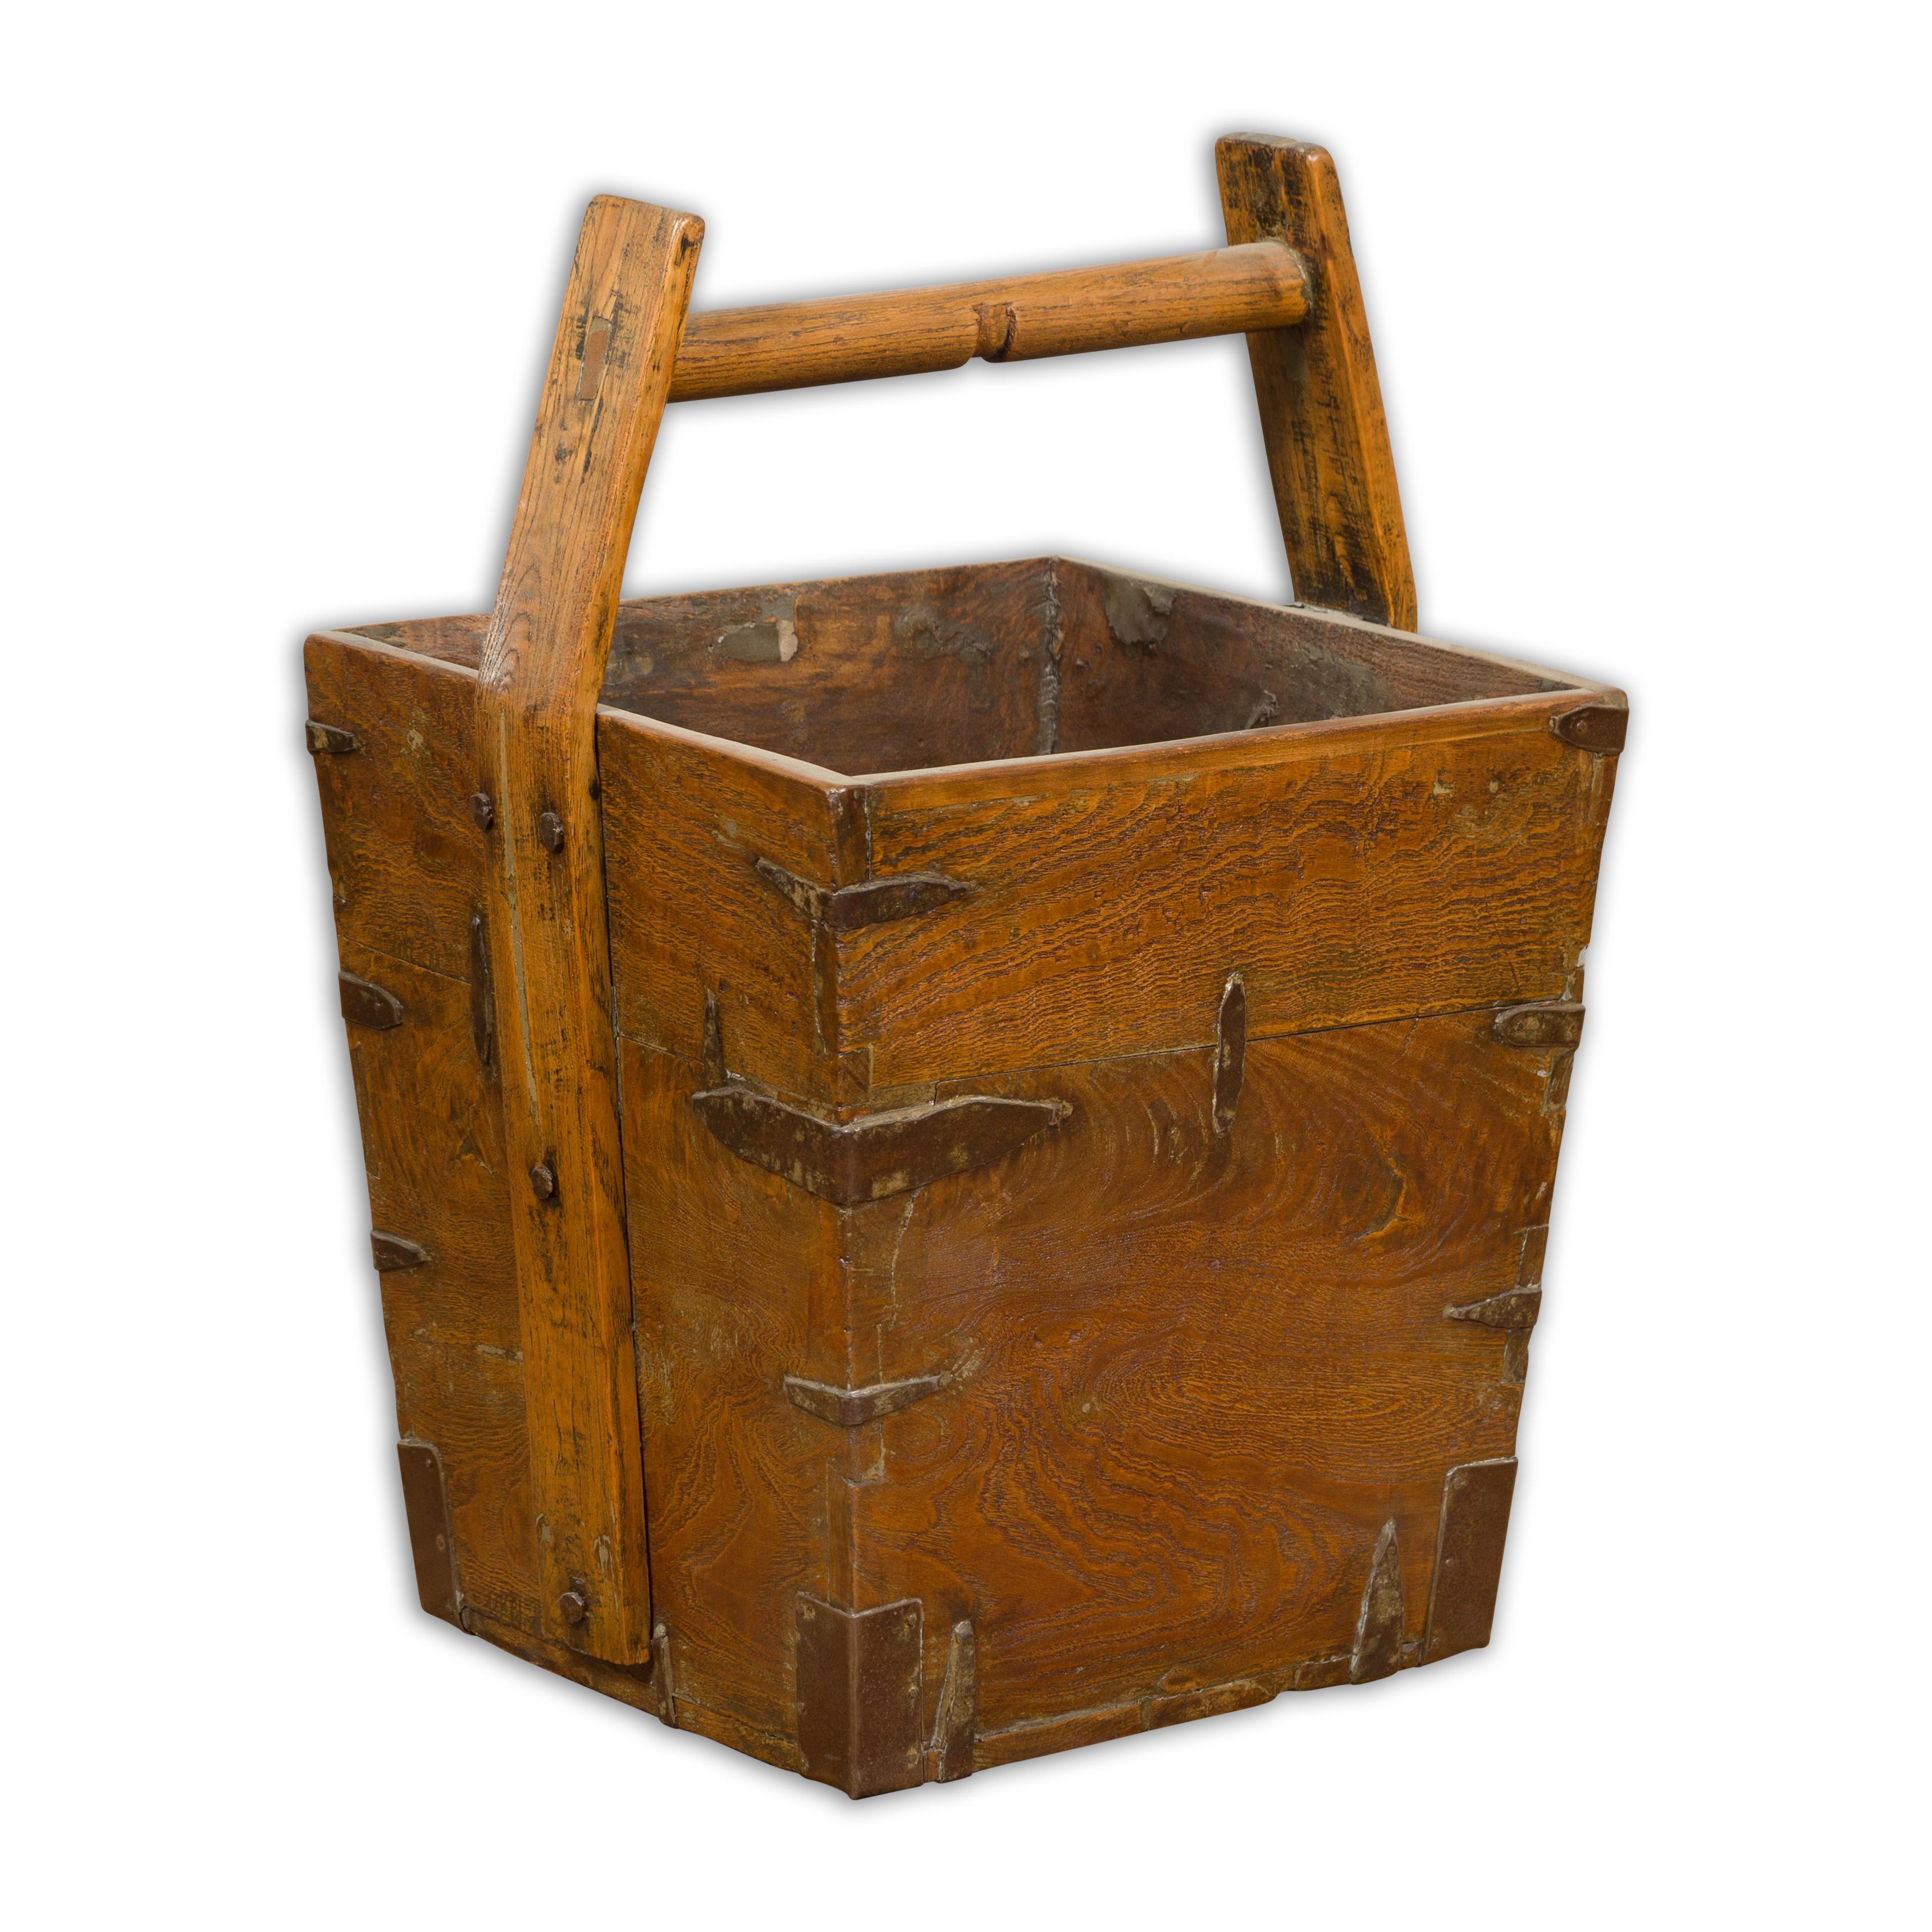 Antique Chinese 19th Century Wood and Metal Grain Basket with Carrying Handle For Sale 10